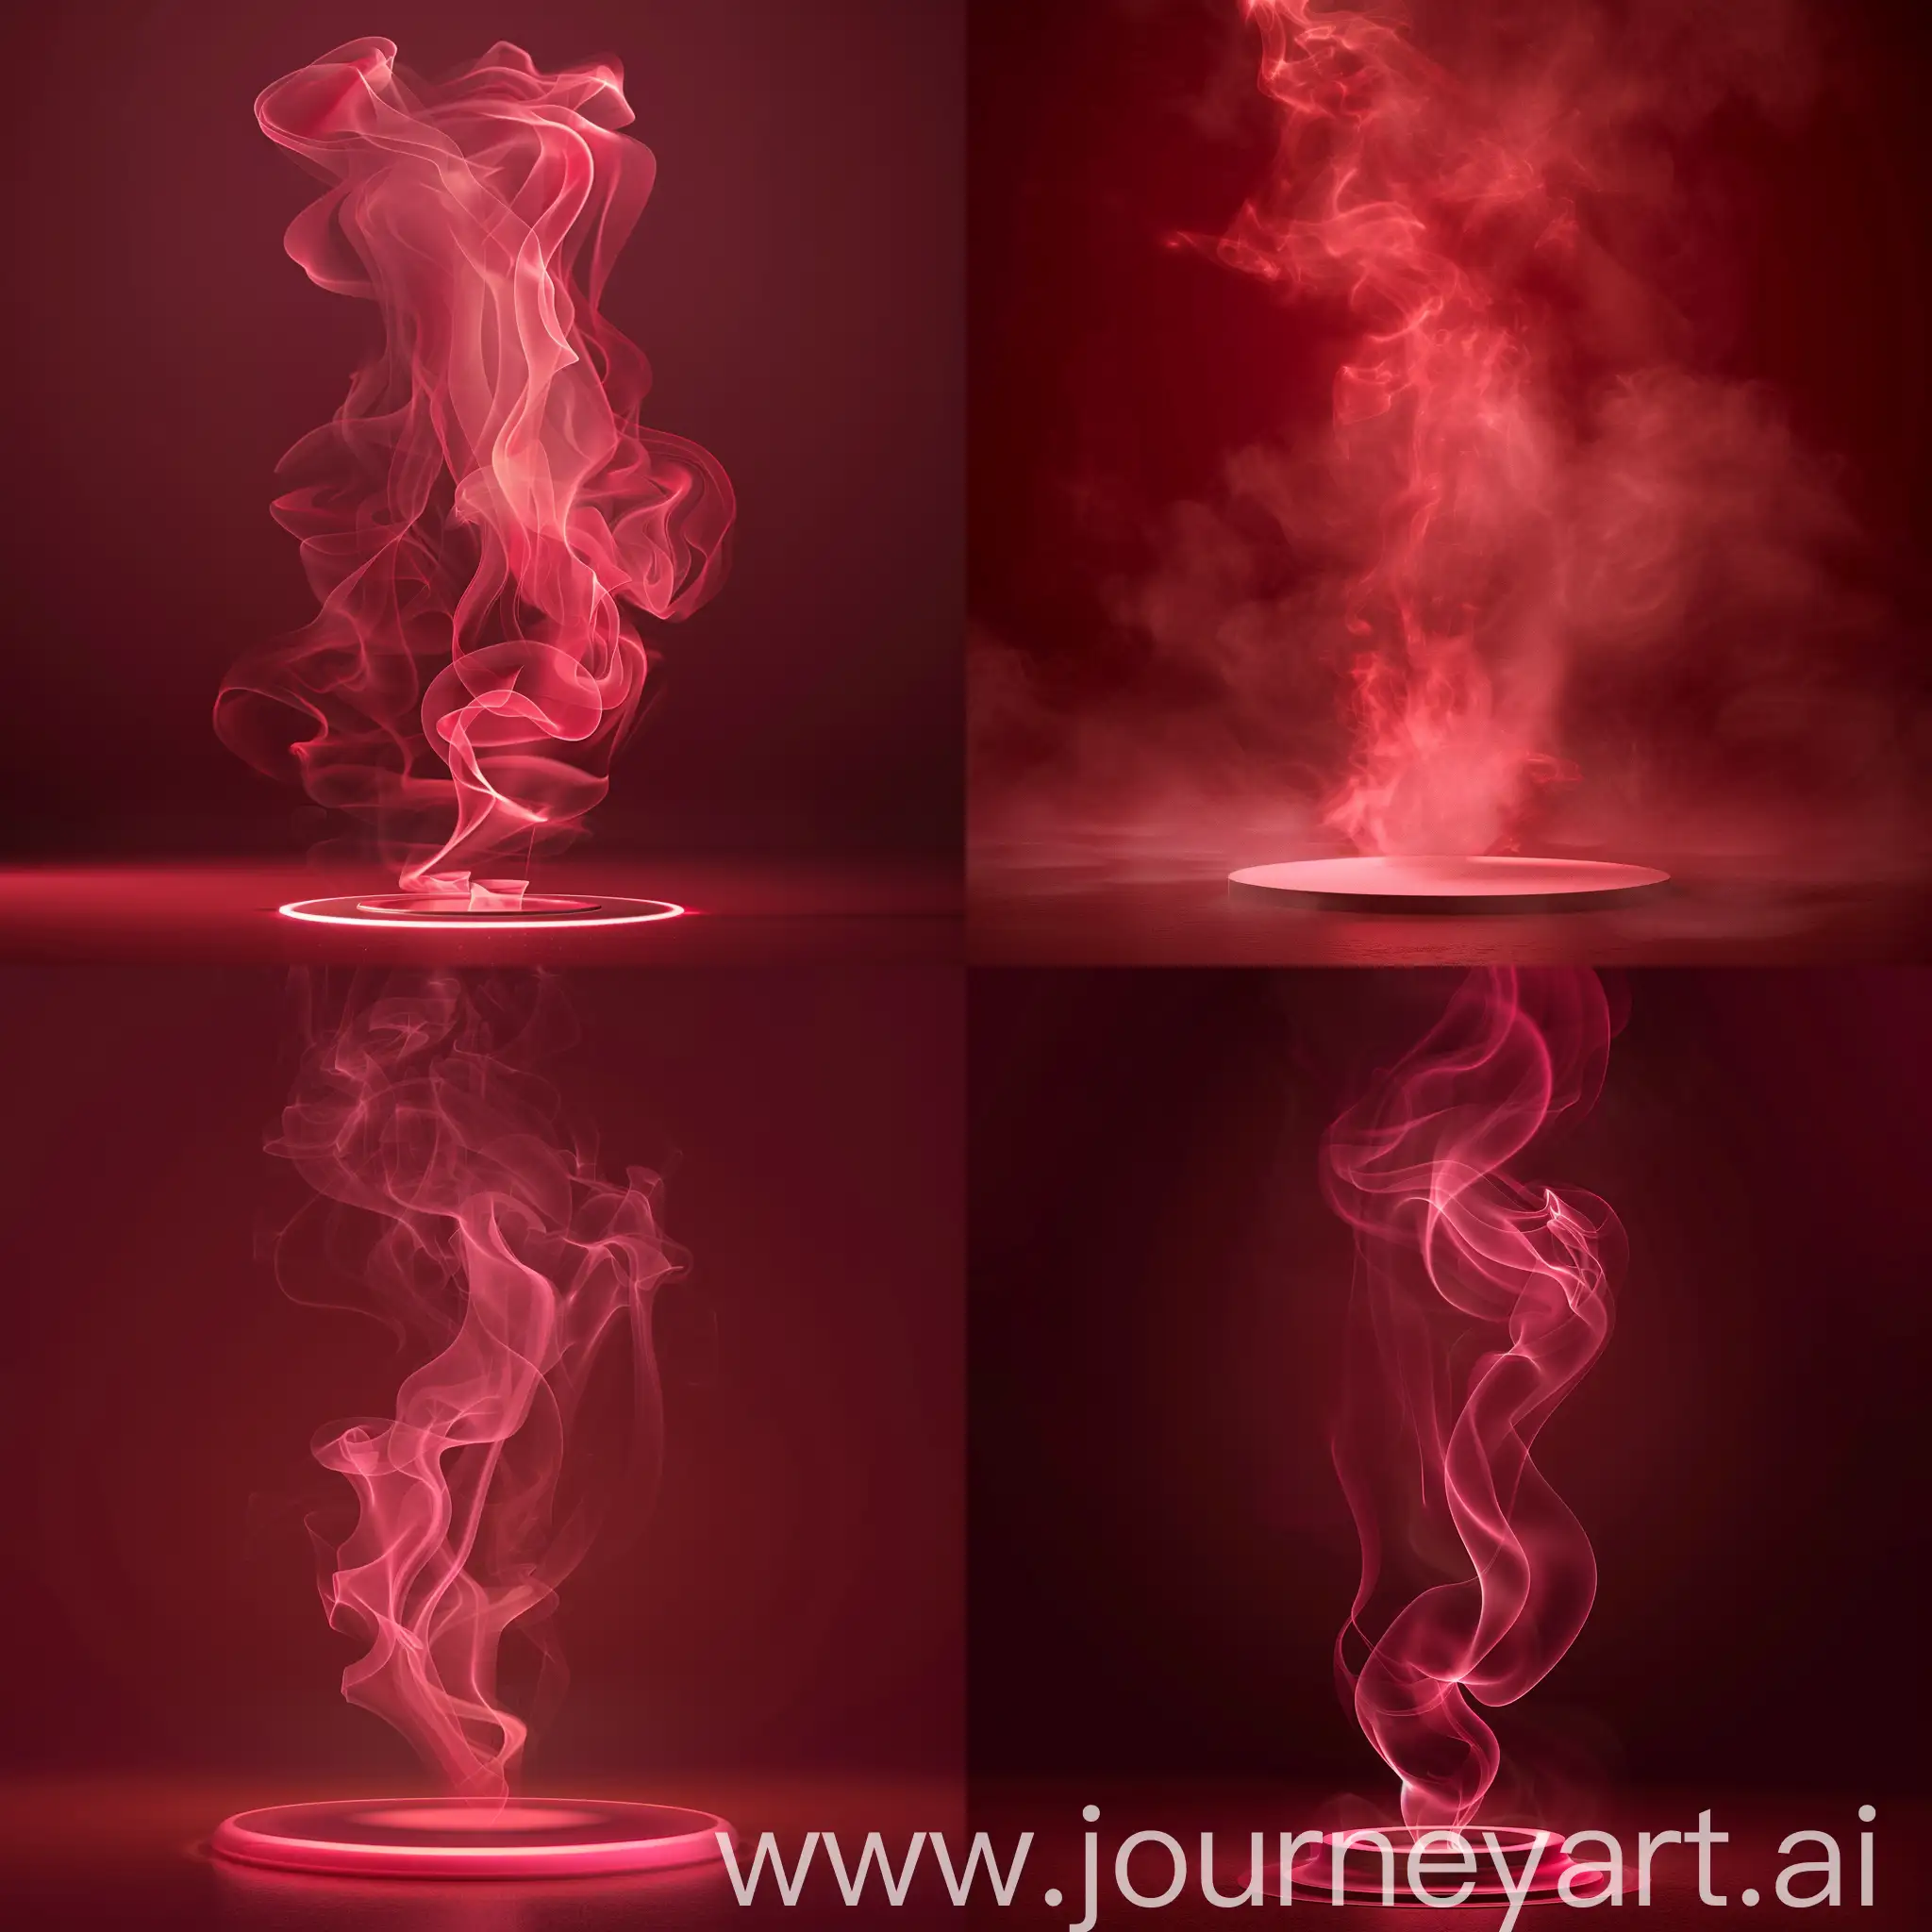 a very thick and soft glowing reddish-pink smoke against a dark red background, a circular 3d base at the bottom